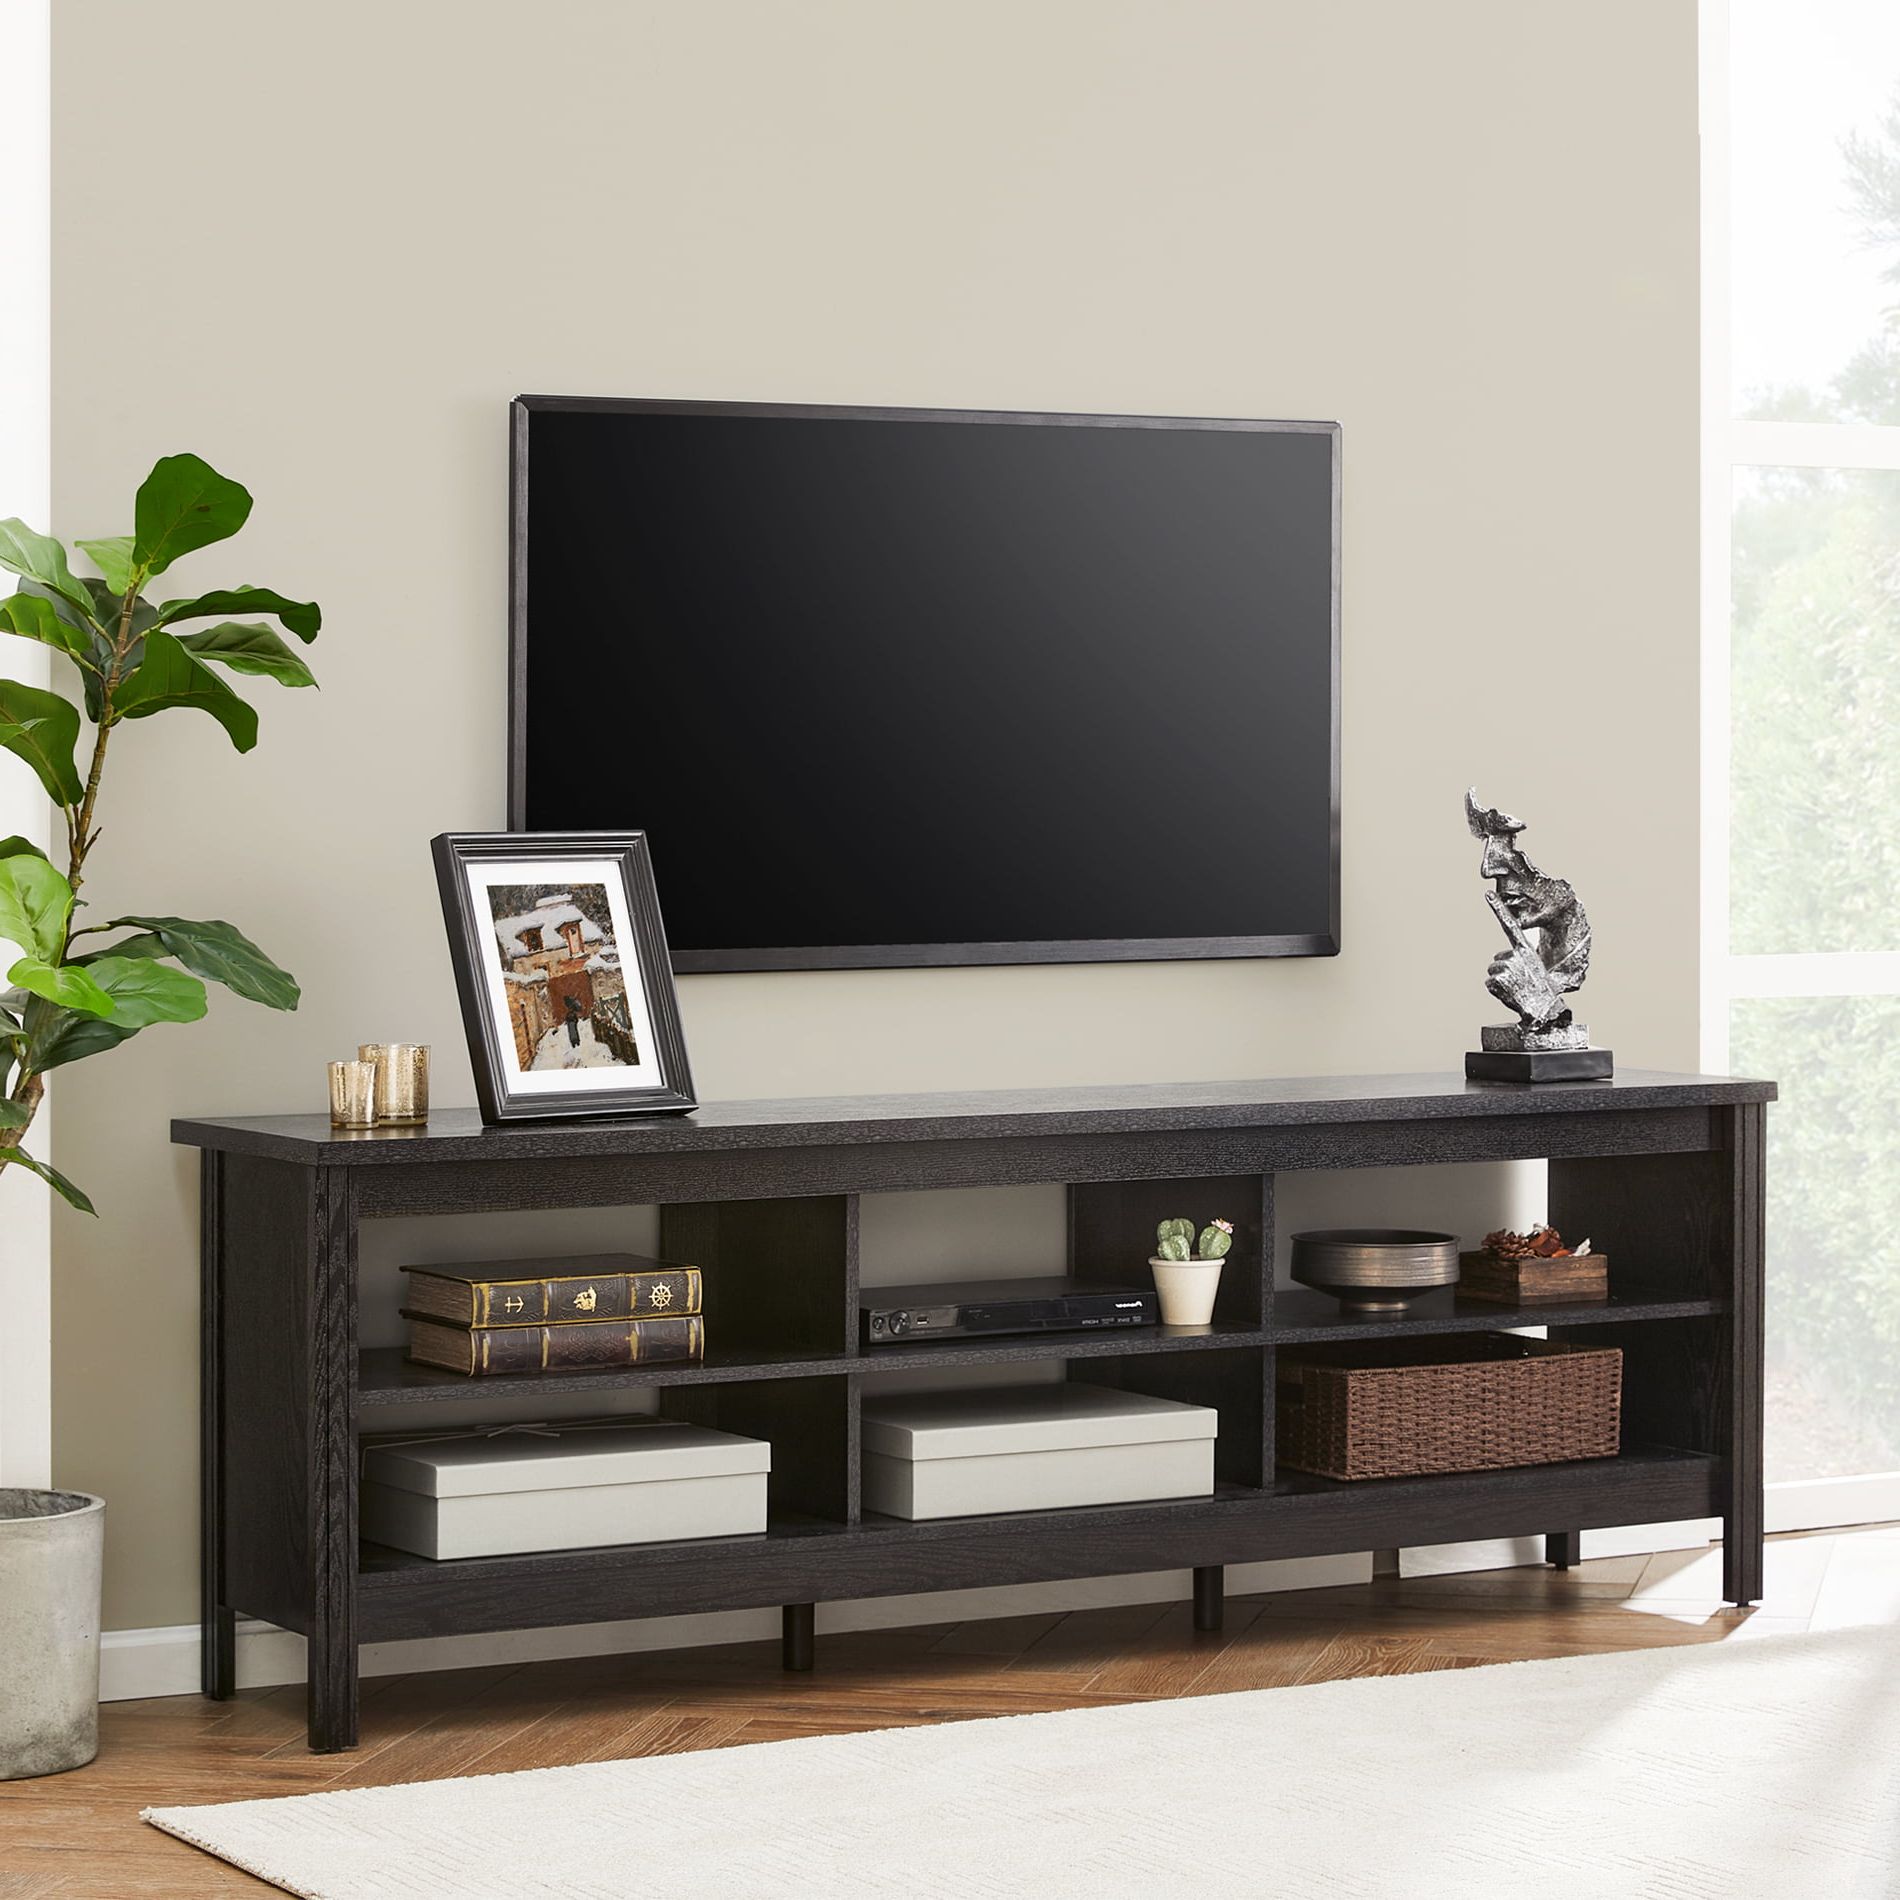 Entertainment Center With Storage Cabinet In Popular Farmhouse Tv Stands For 75 Inch Flat Screen Media Console Storage (View 9 of 15)